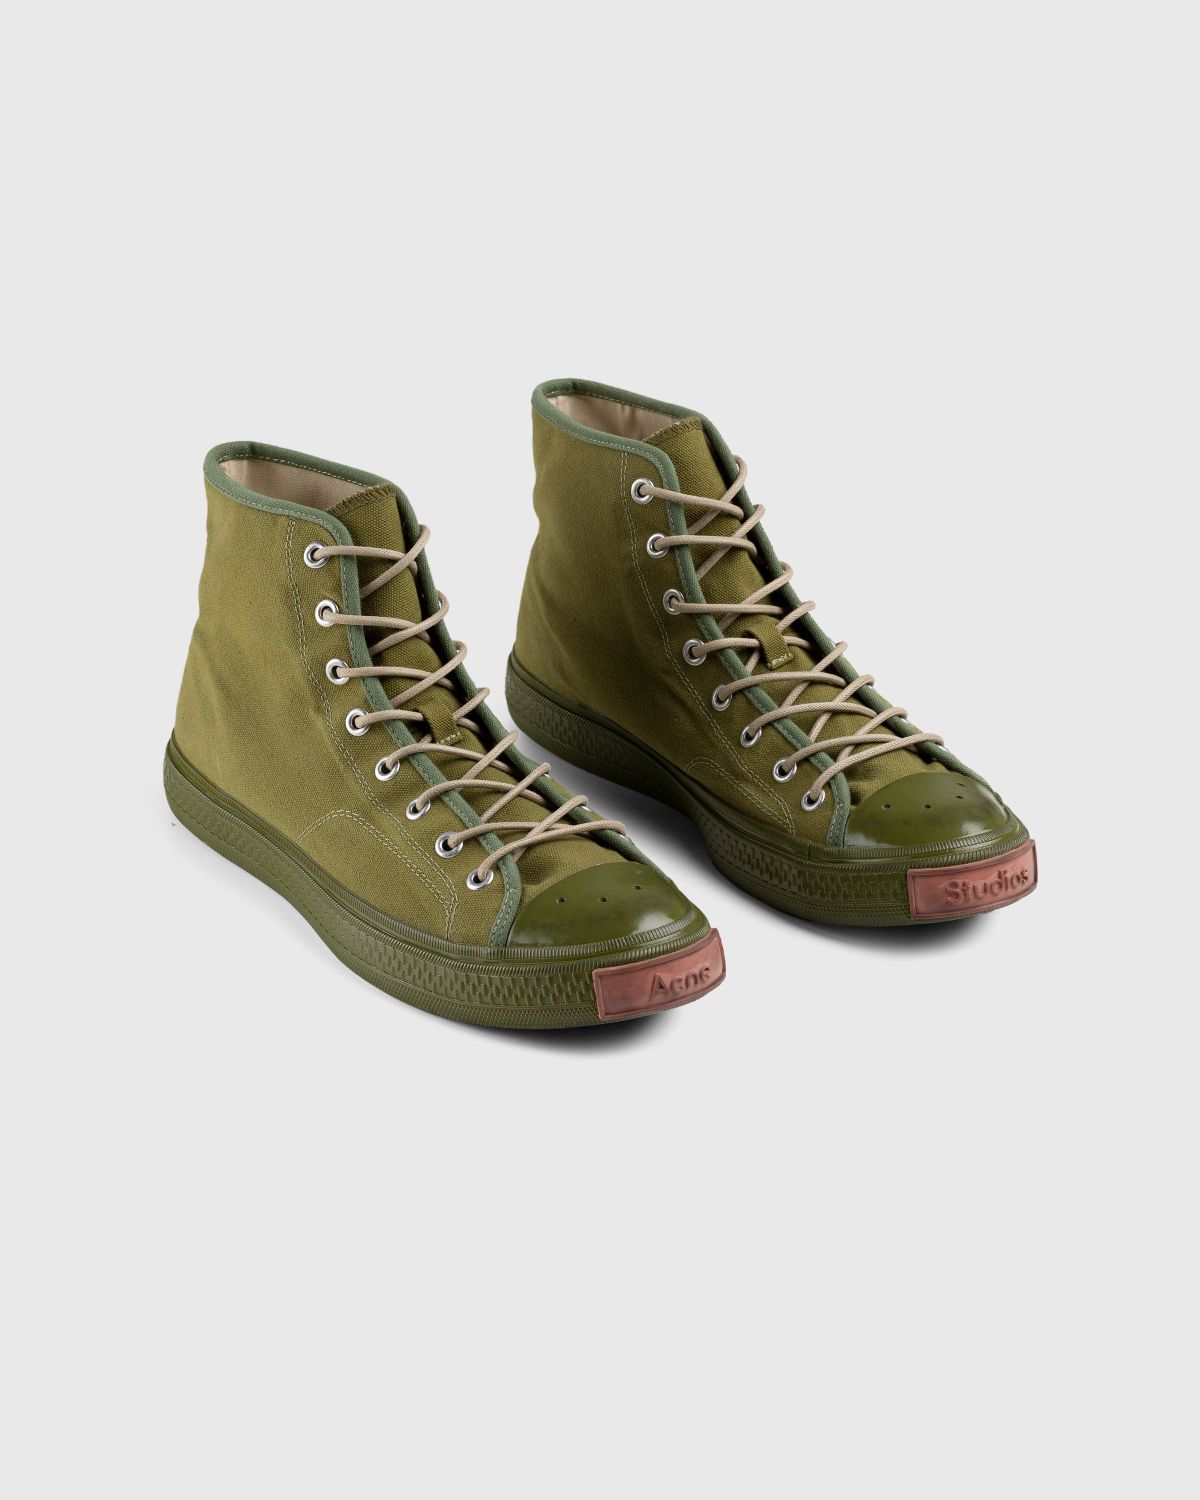 Acne Studios – Ballow High-Top Sneakers Olive Green - High Top Sneakers - Green - Image 3